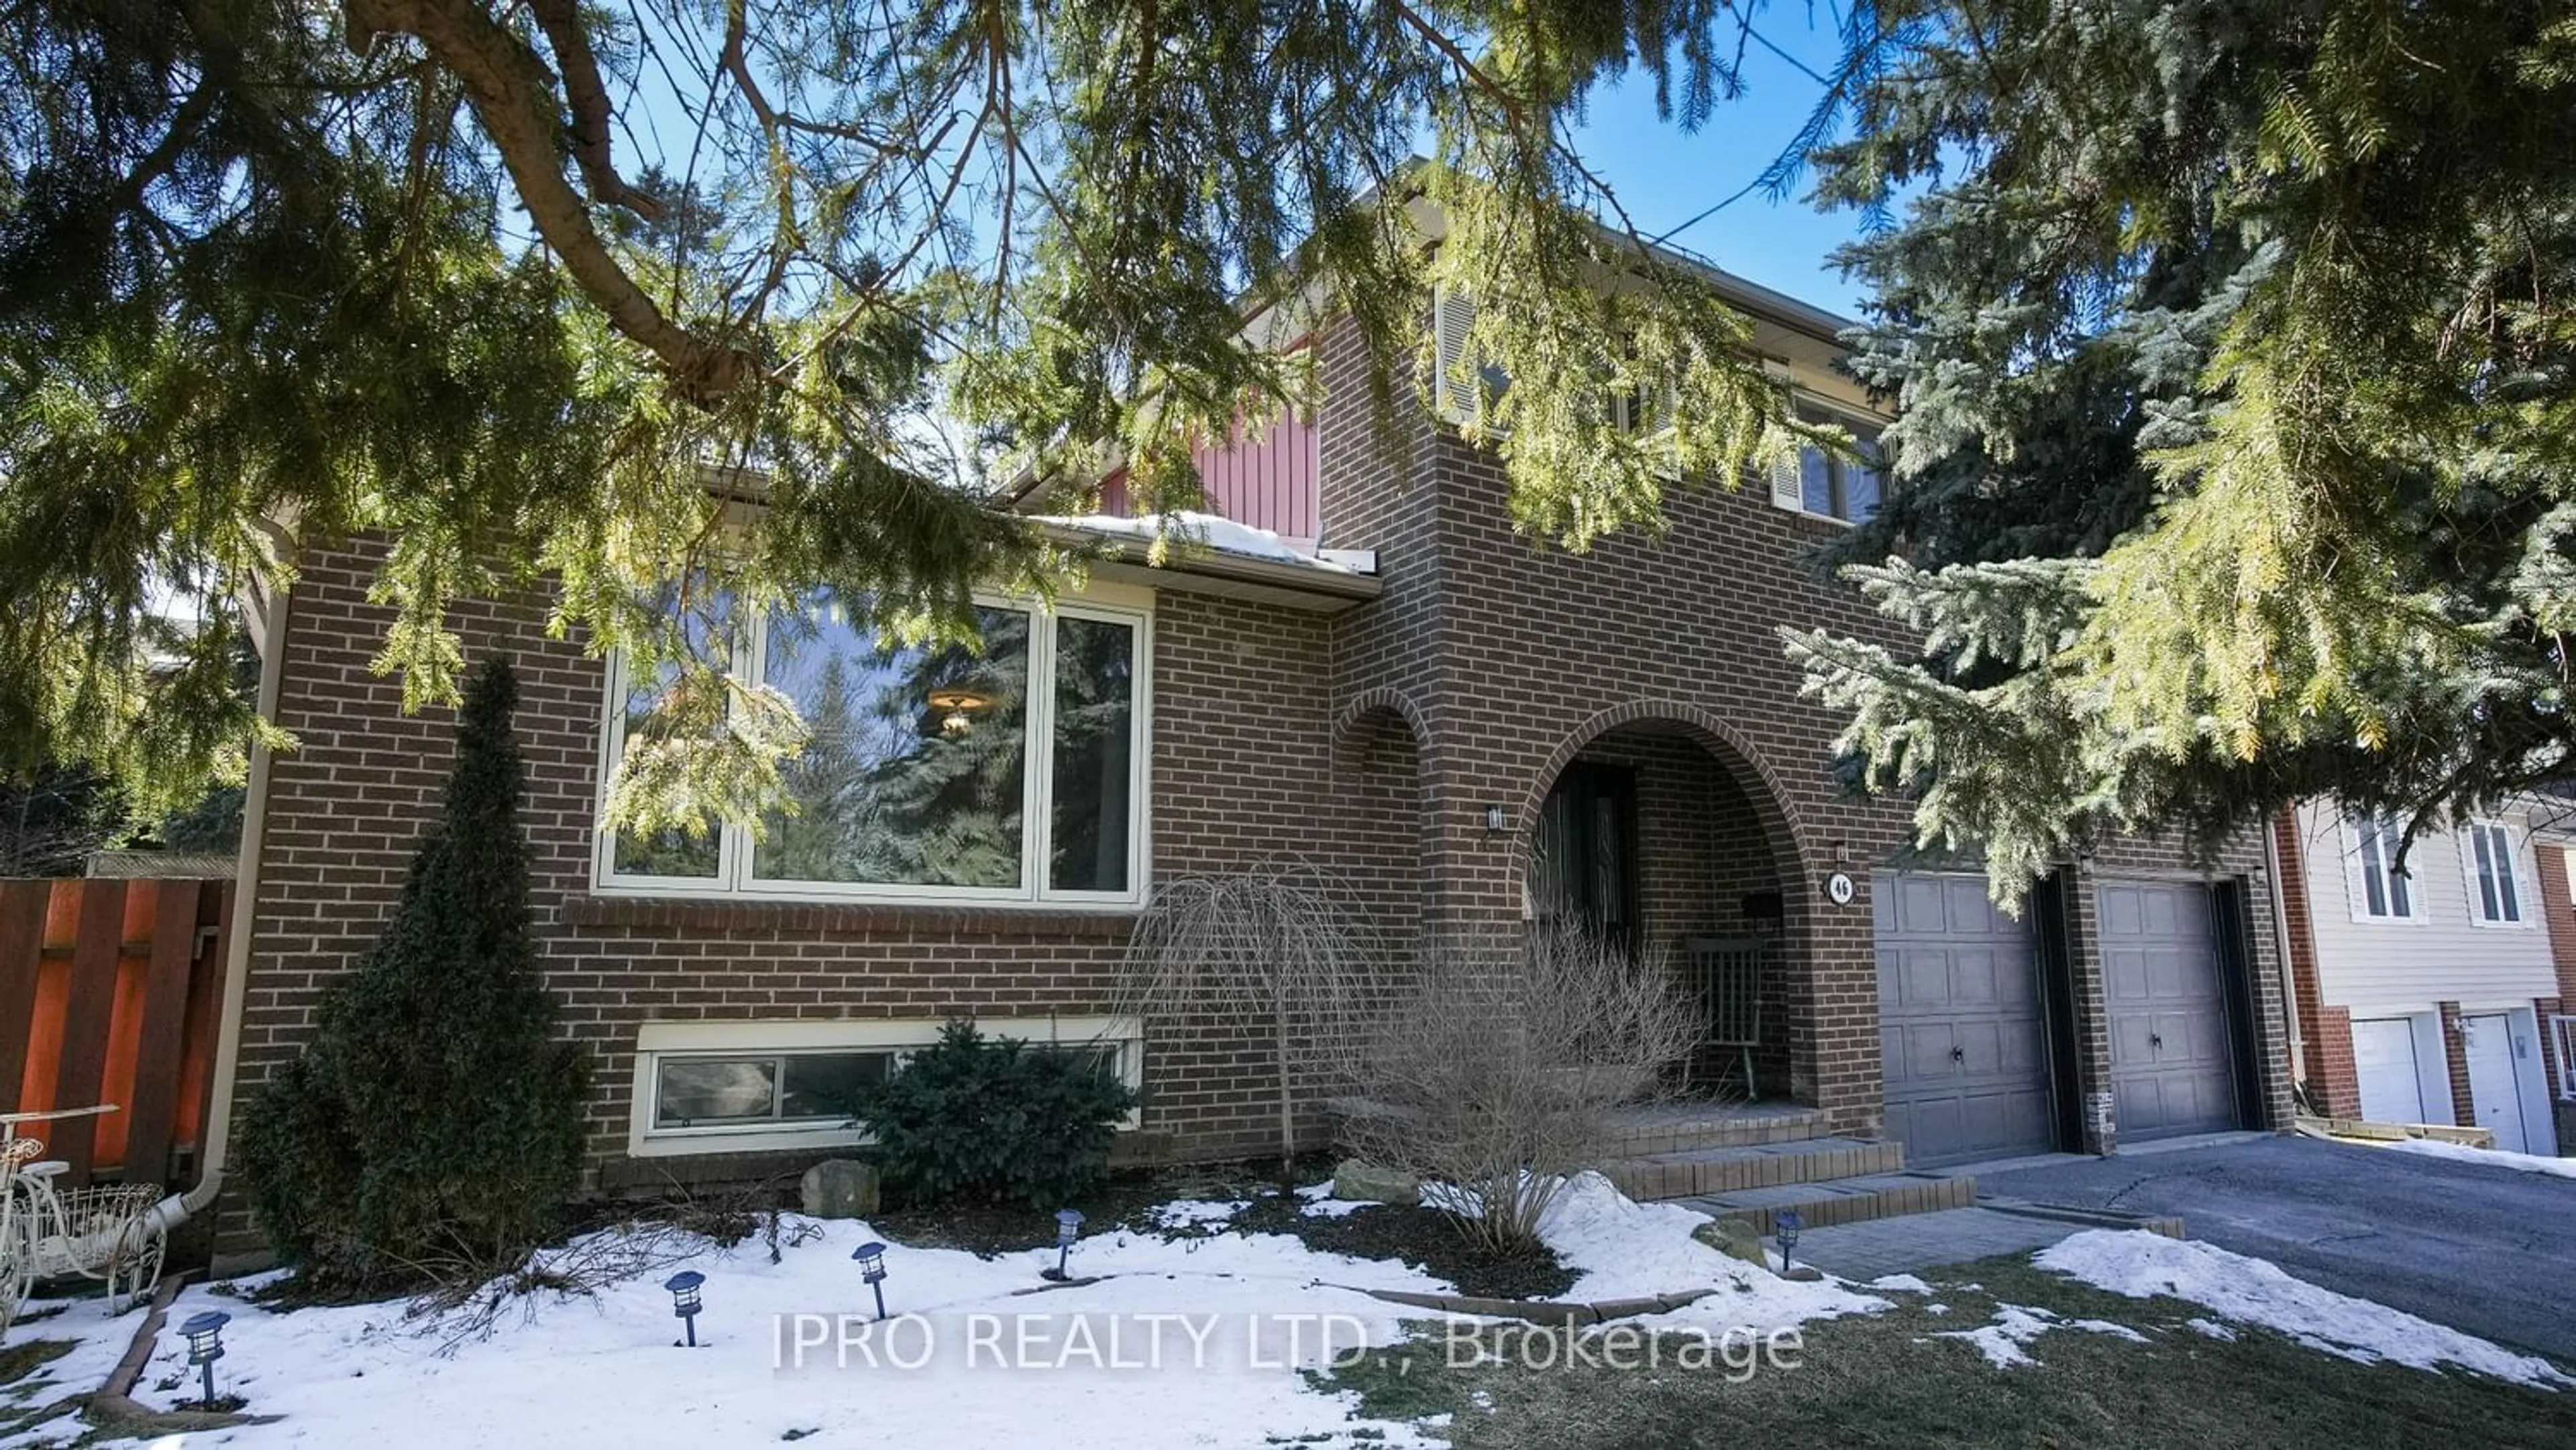 Home with brick exterior material for 46 College Ave, Orangeville Ontario L9W 3H5